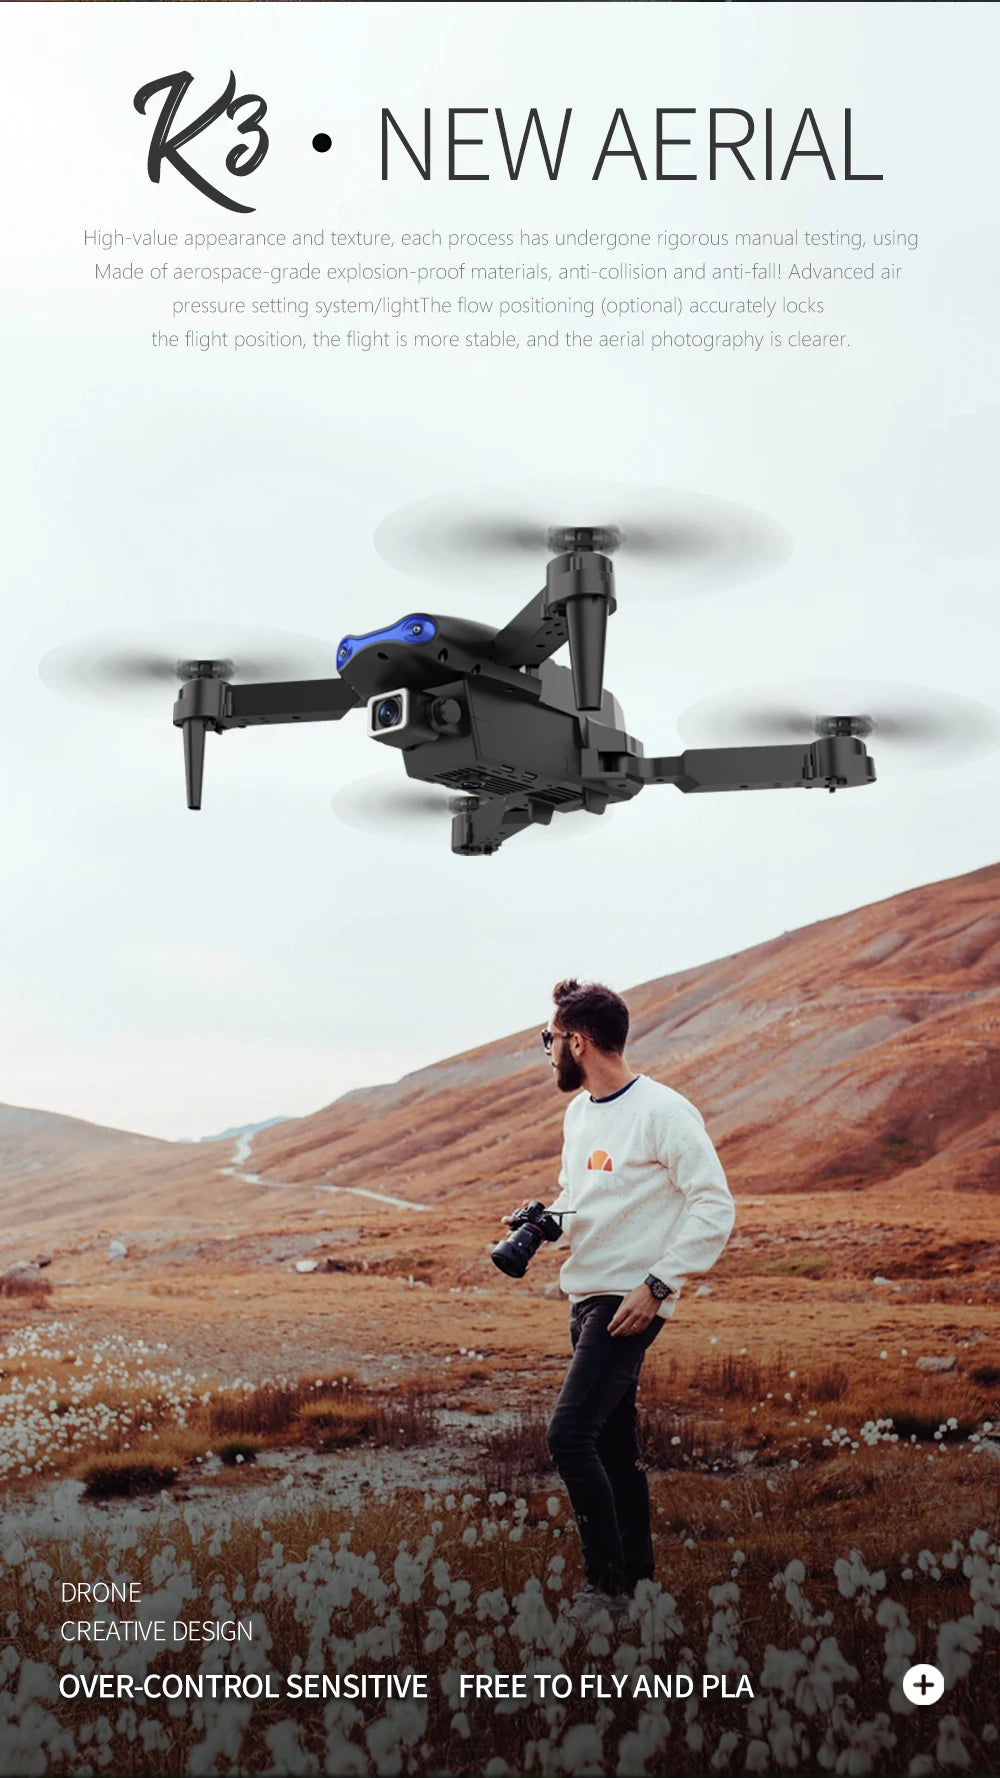 XYRC K3 Mini Drone, k3 newaerial high-value appearance and texture,